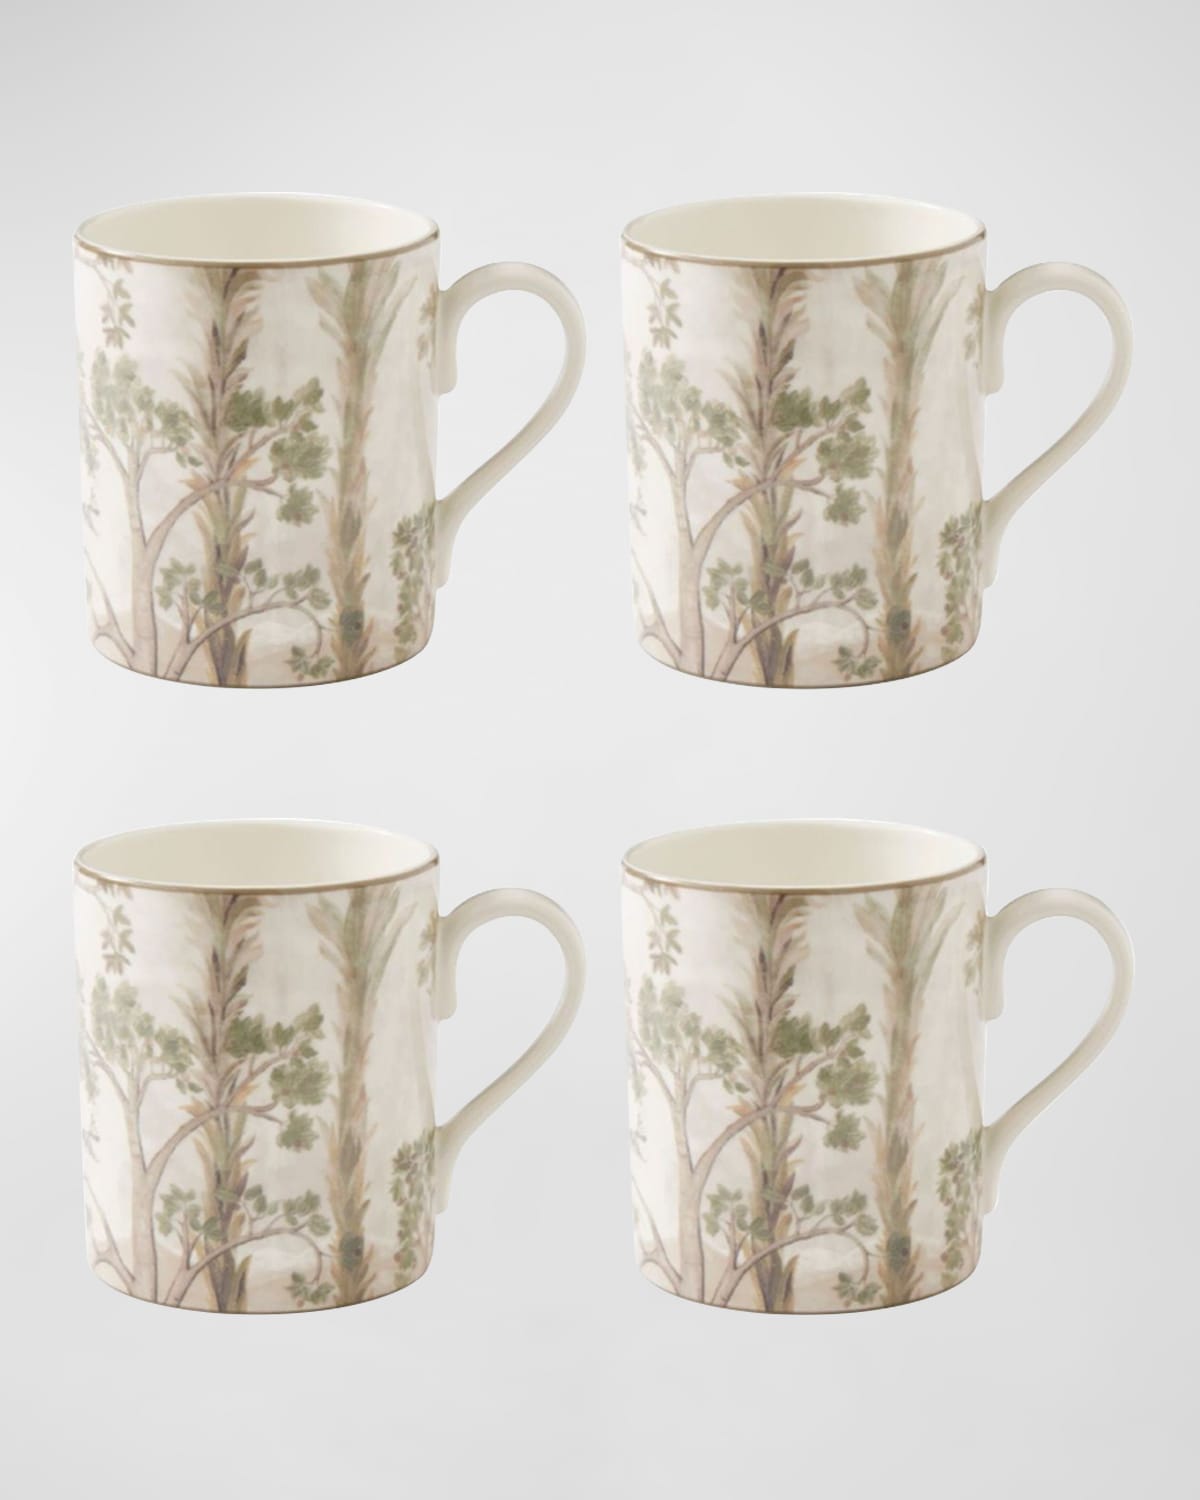 Kit Kemp For Spode Tall Trees Mug, Set Of 4 In Assorted Colours